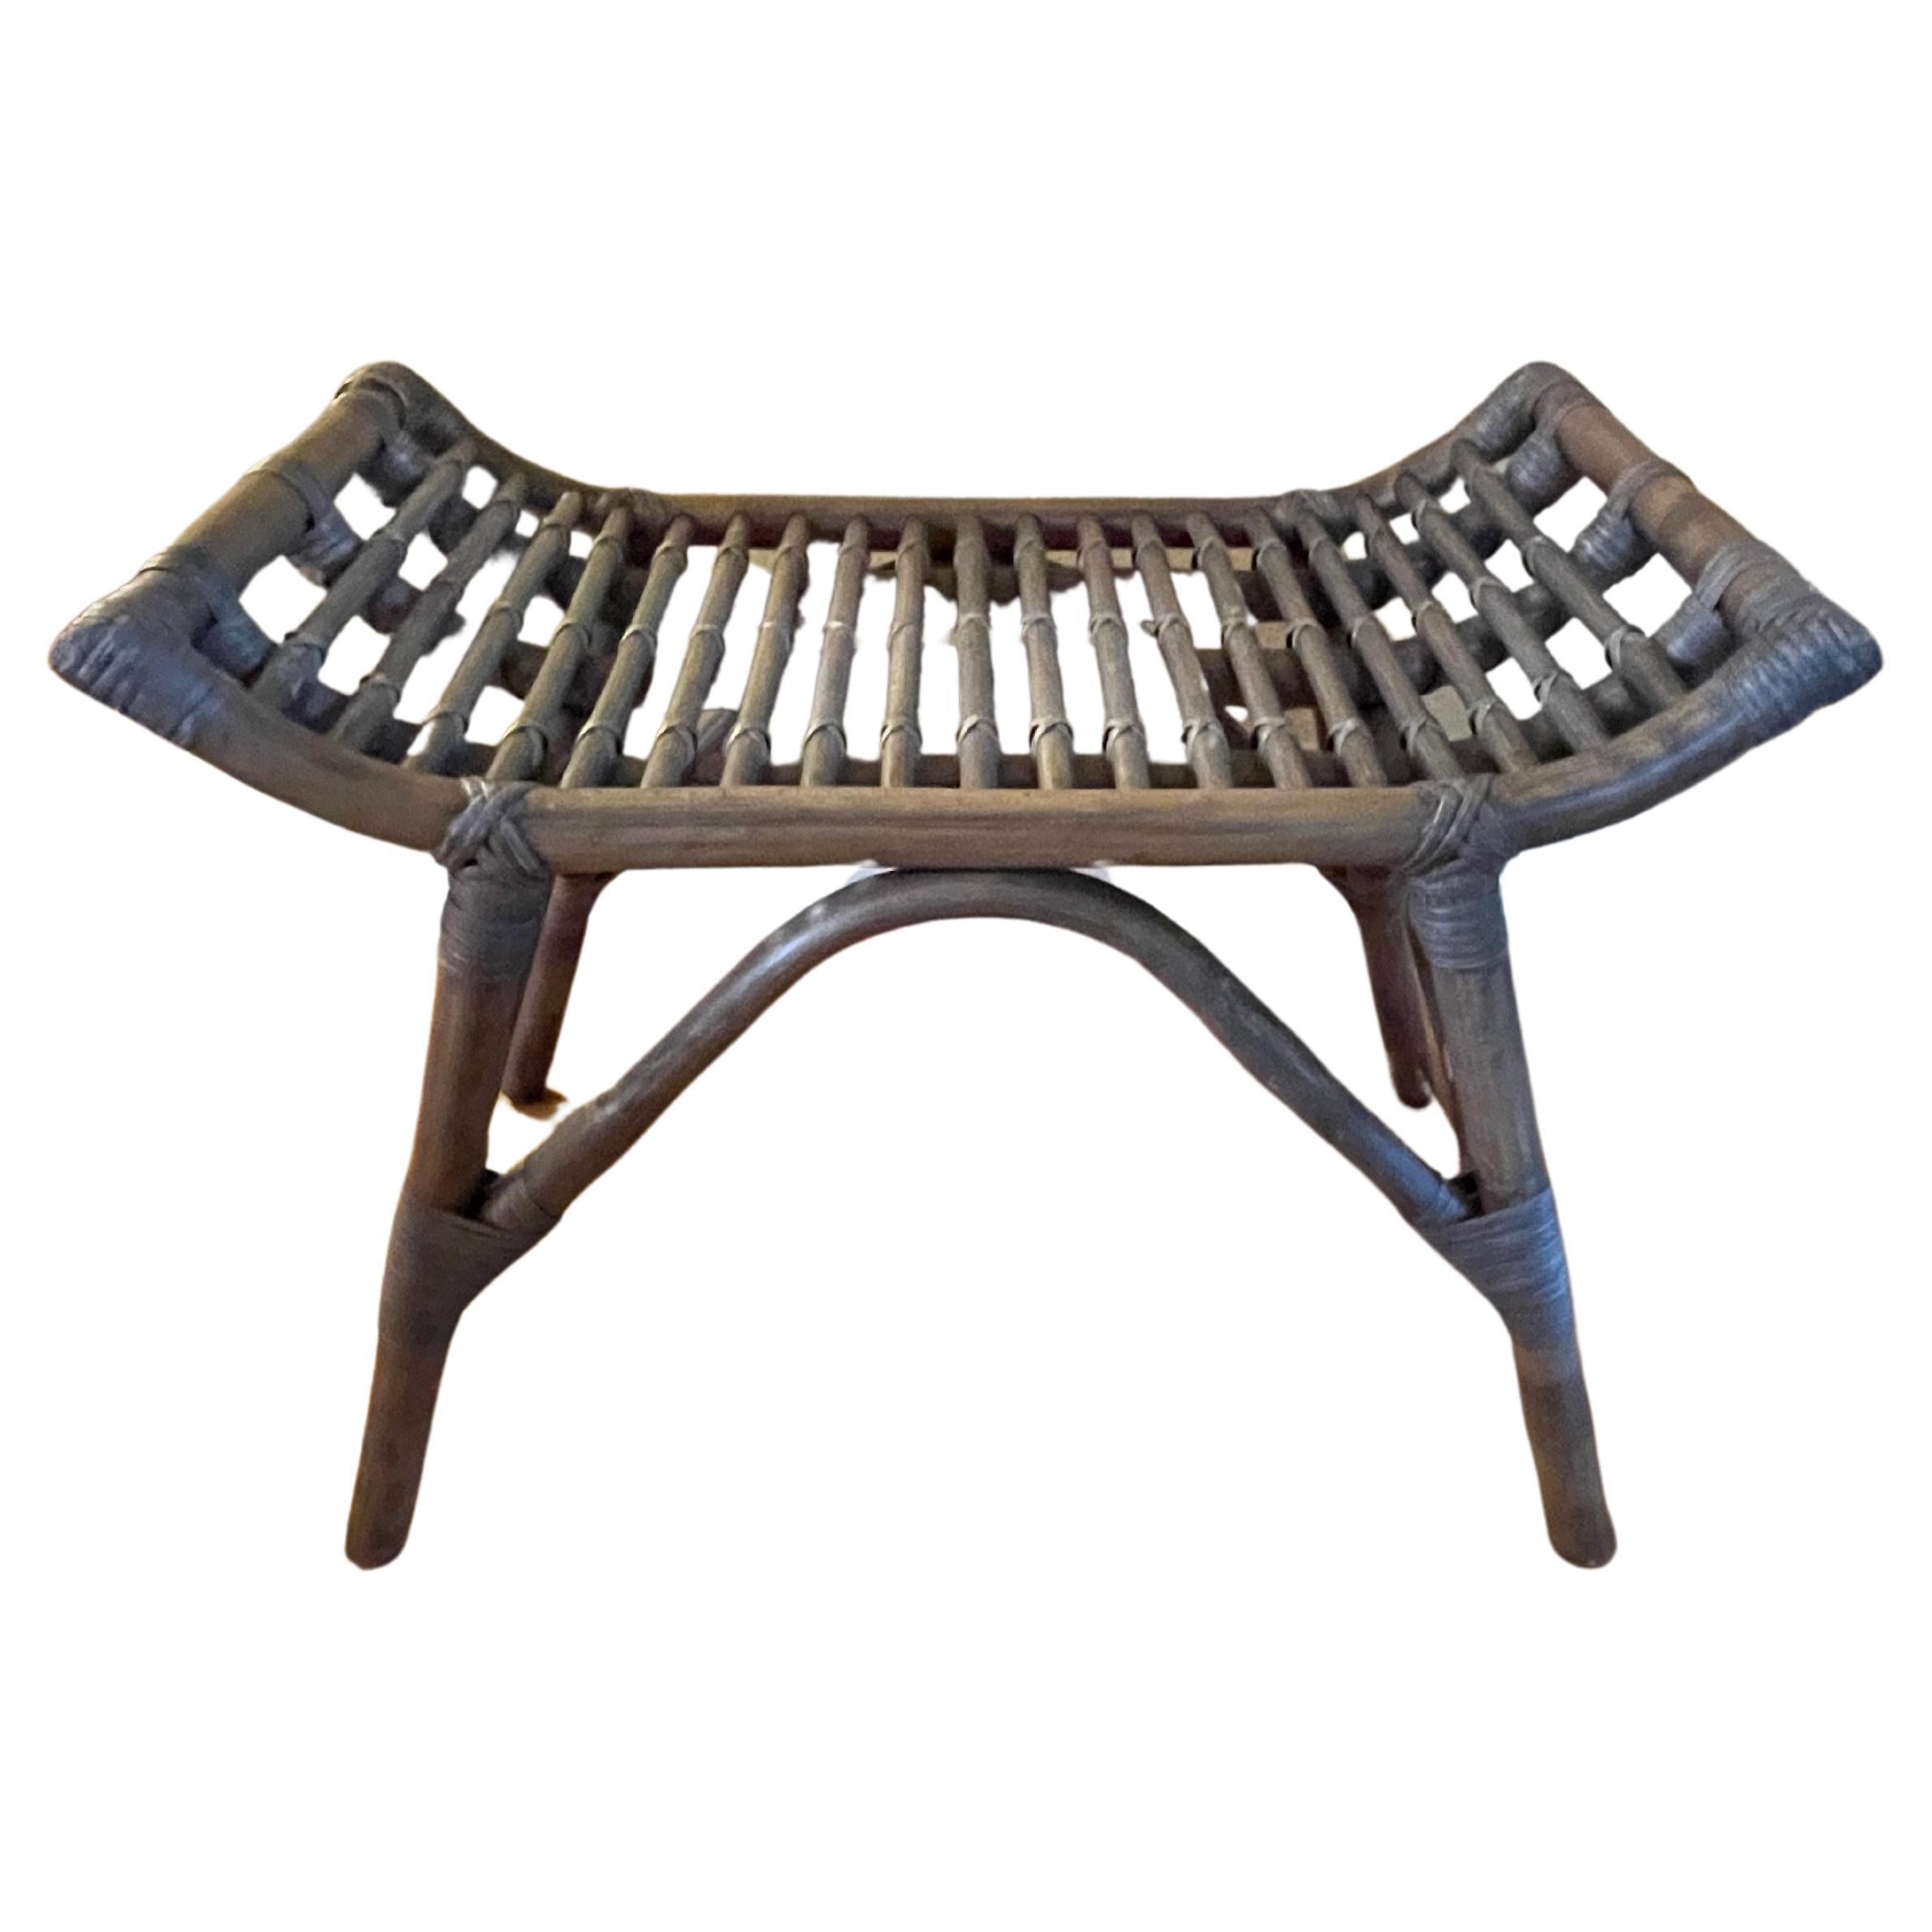 Driftwood-Color Rattan and Bamboo Bench or Footstool For Sale